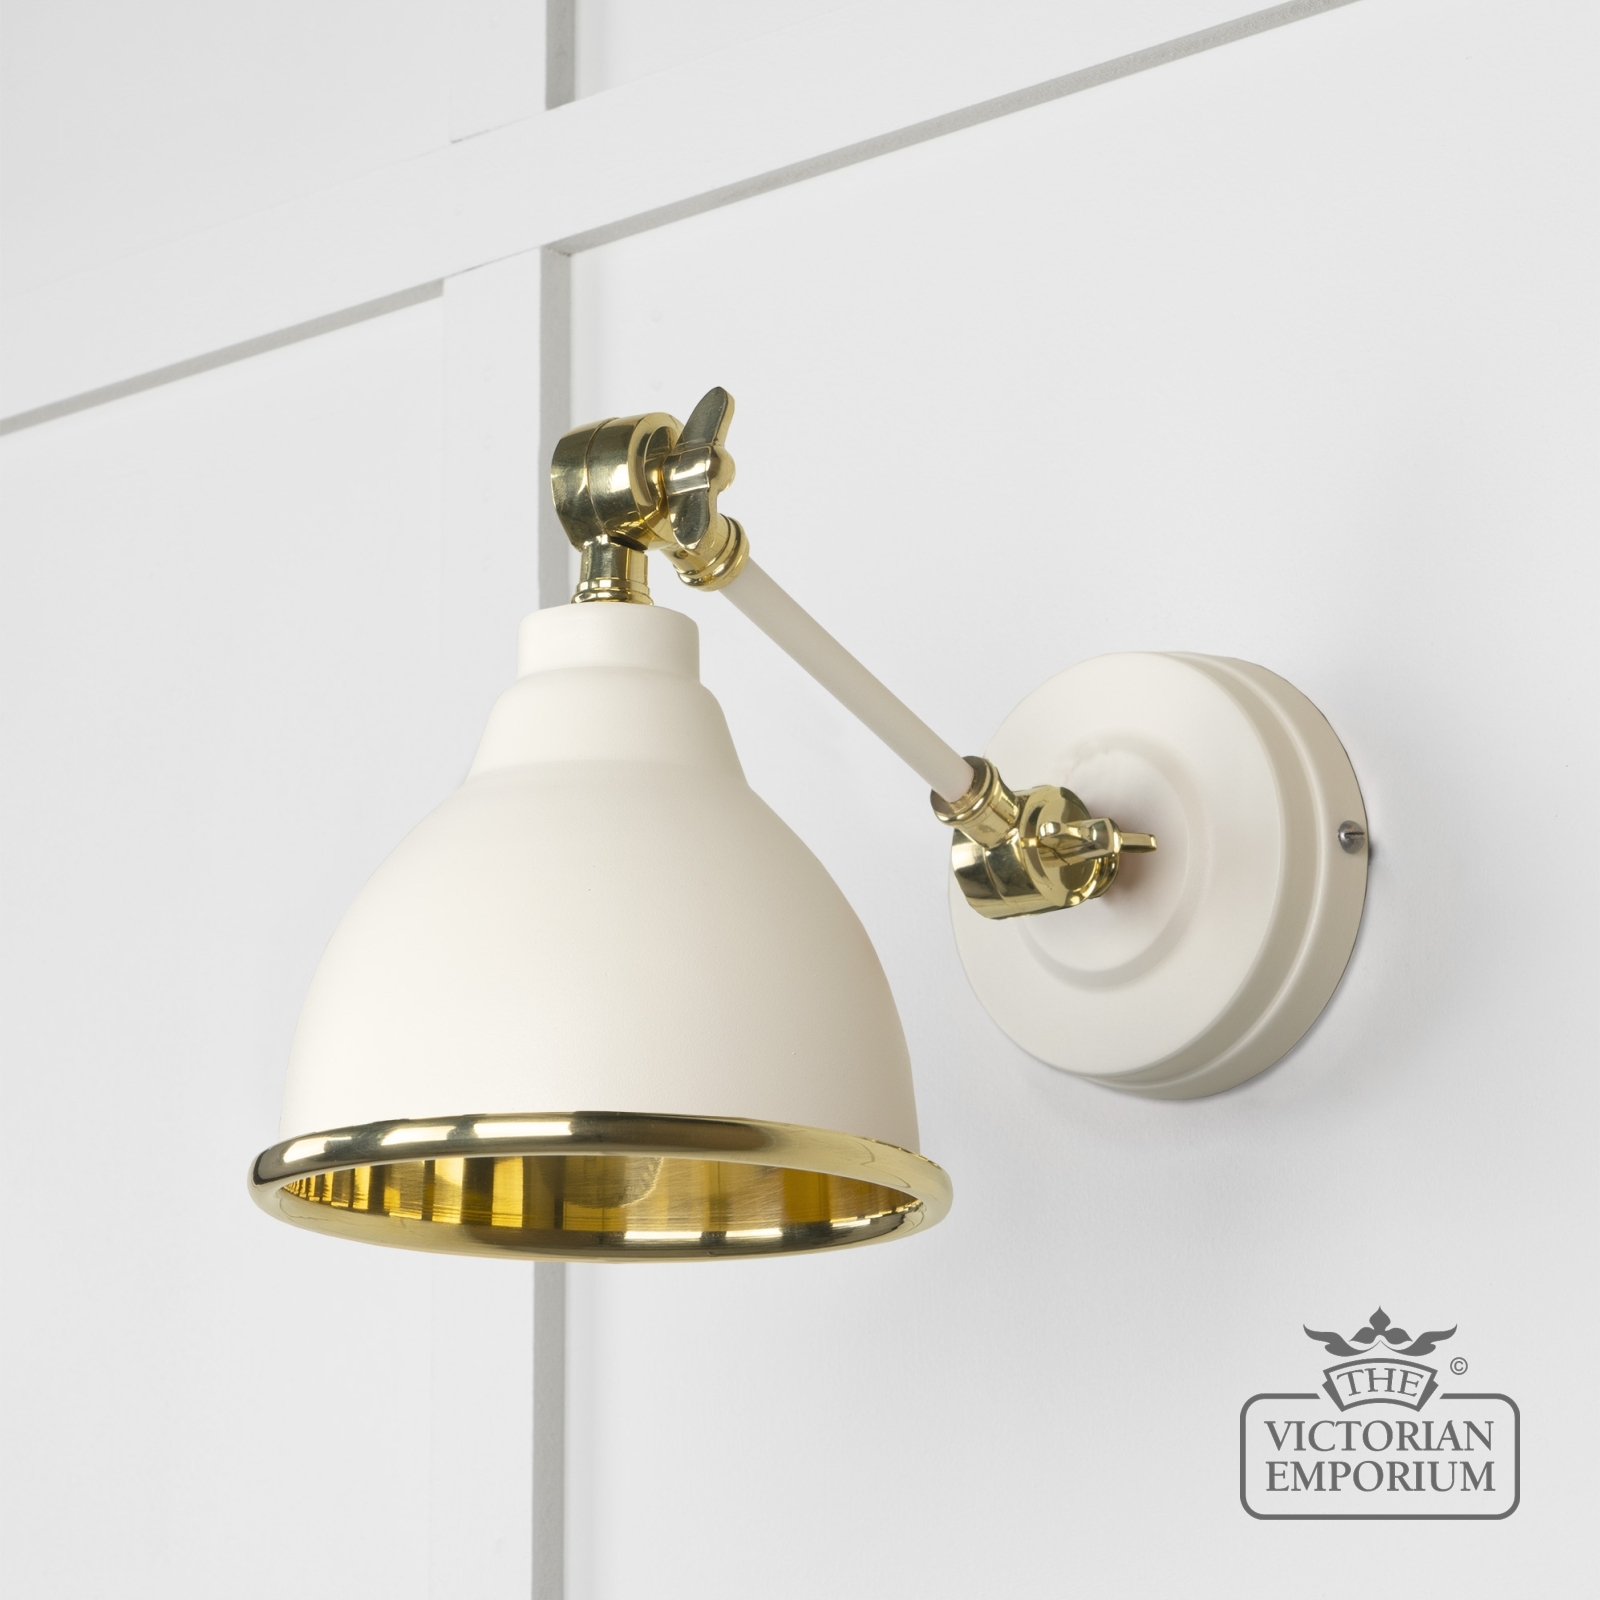 Brindle Wall Light with Smooth Brass Interior and Teasel Exterior